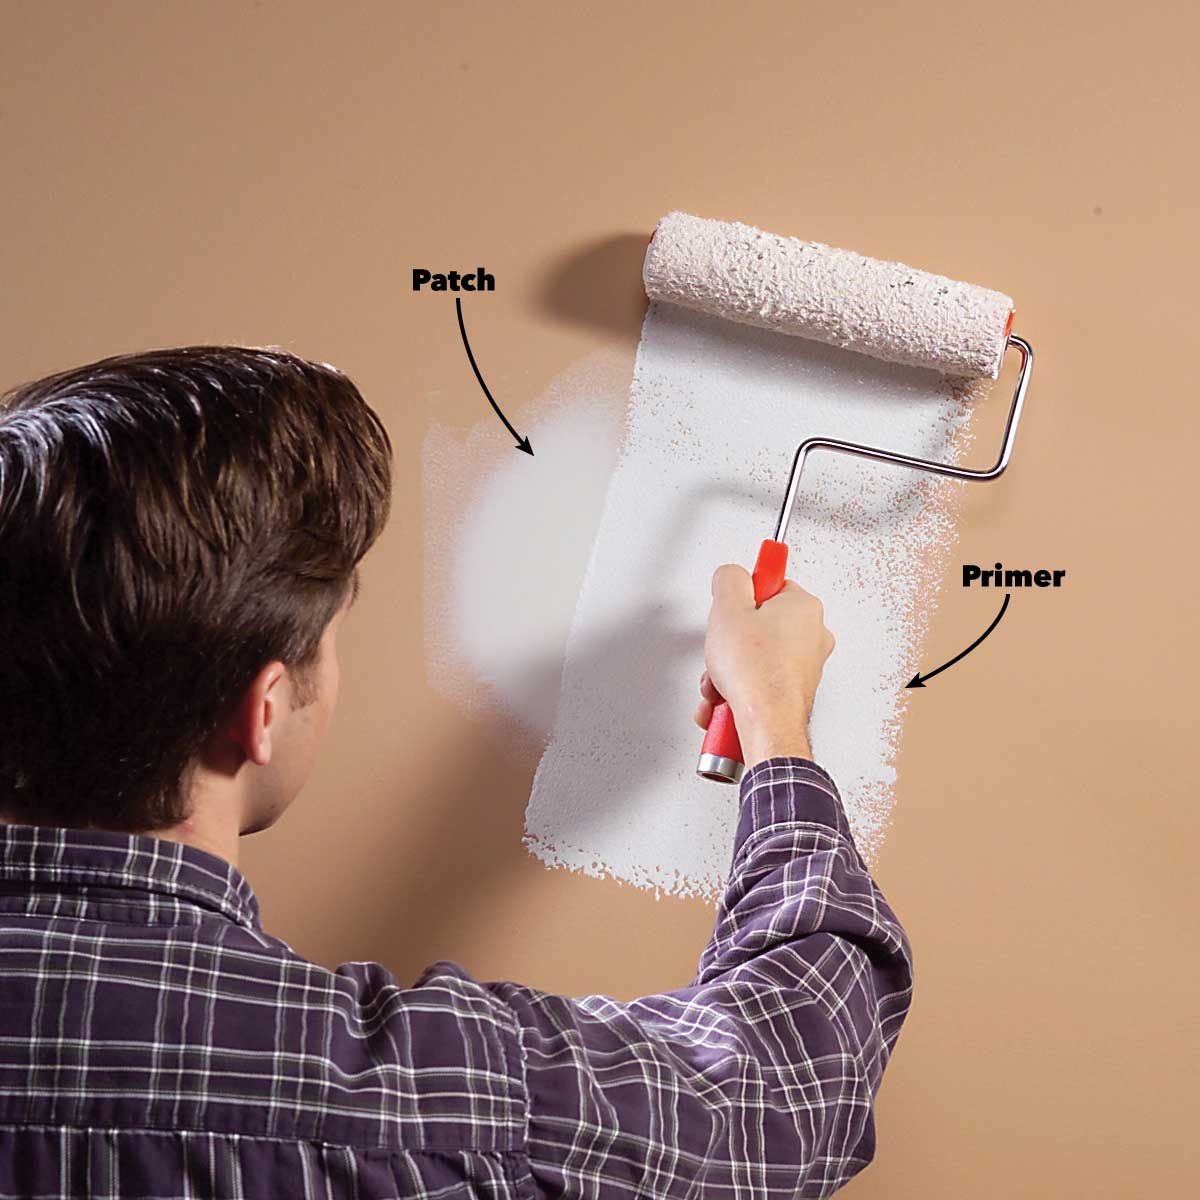 How to paint a wall: 15 steps for painting walls for beginners